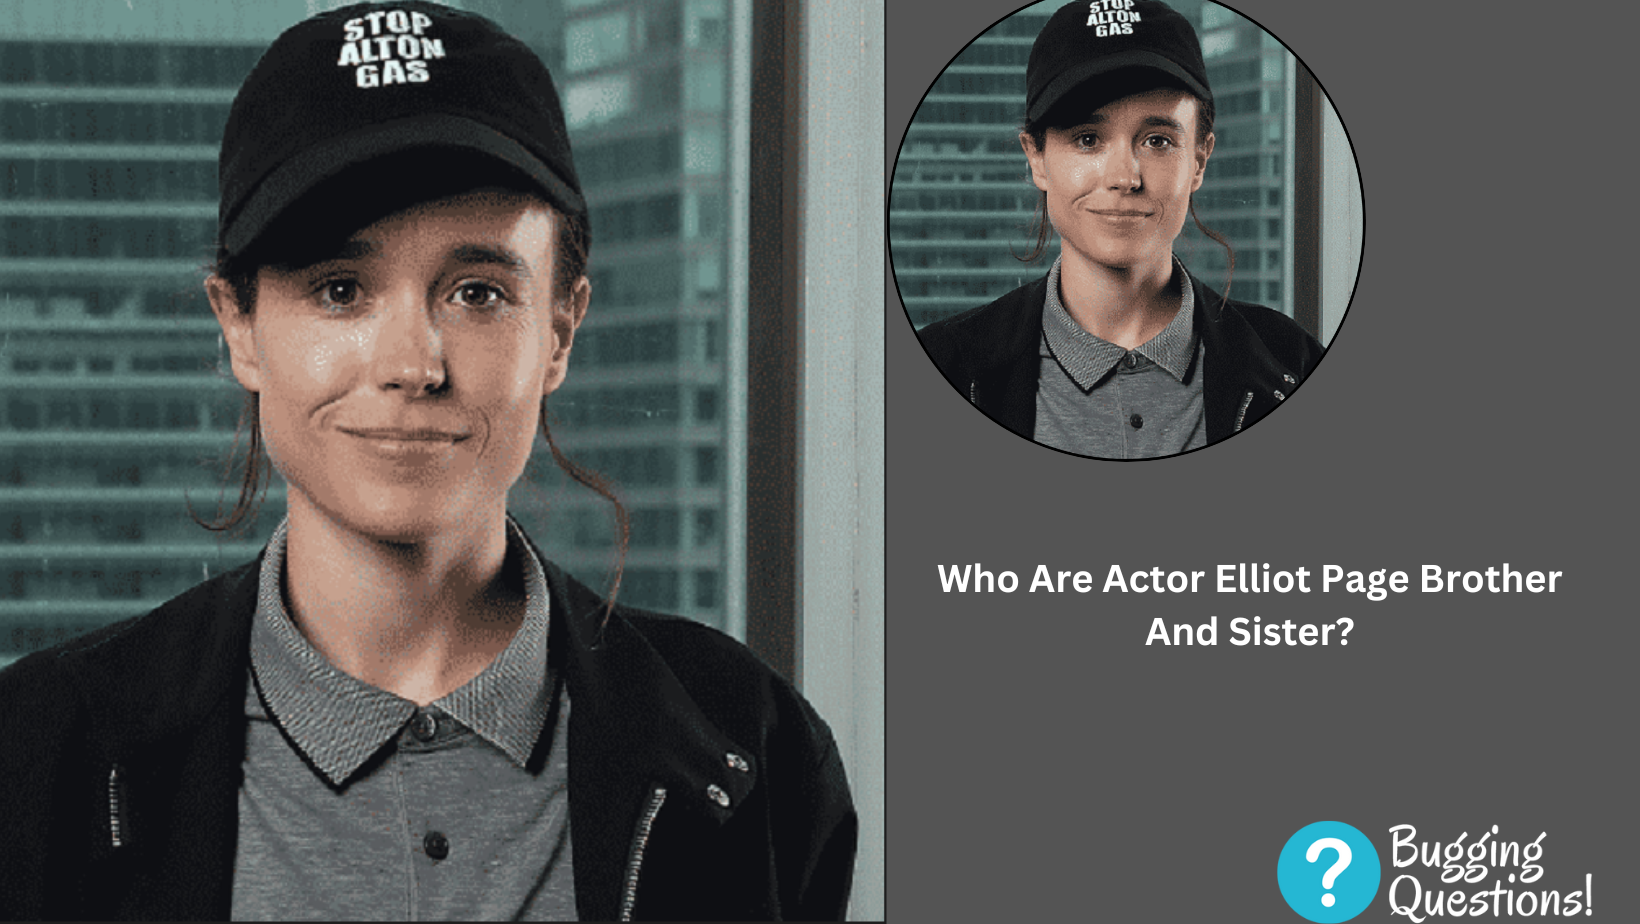 Who Are Actor Elliot Page Brother And Sister?